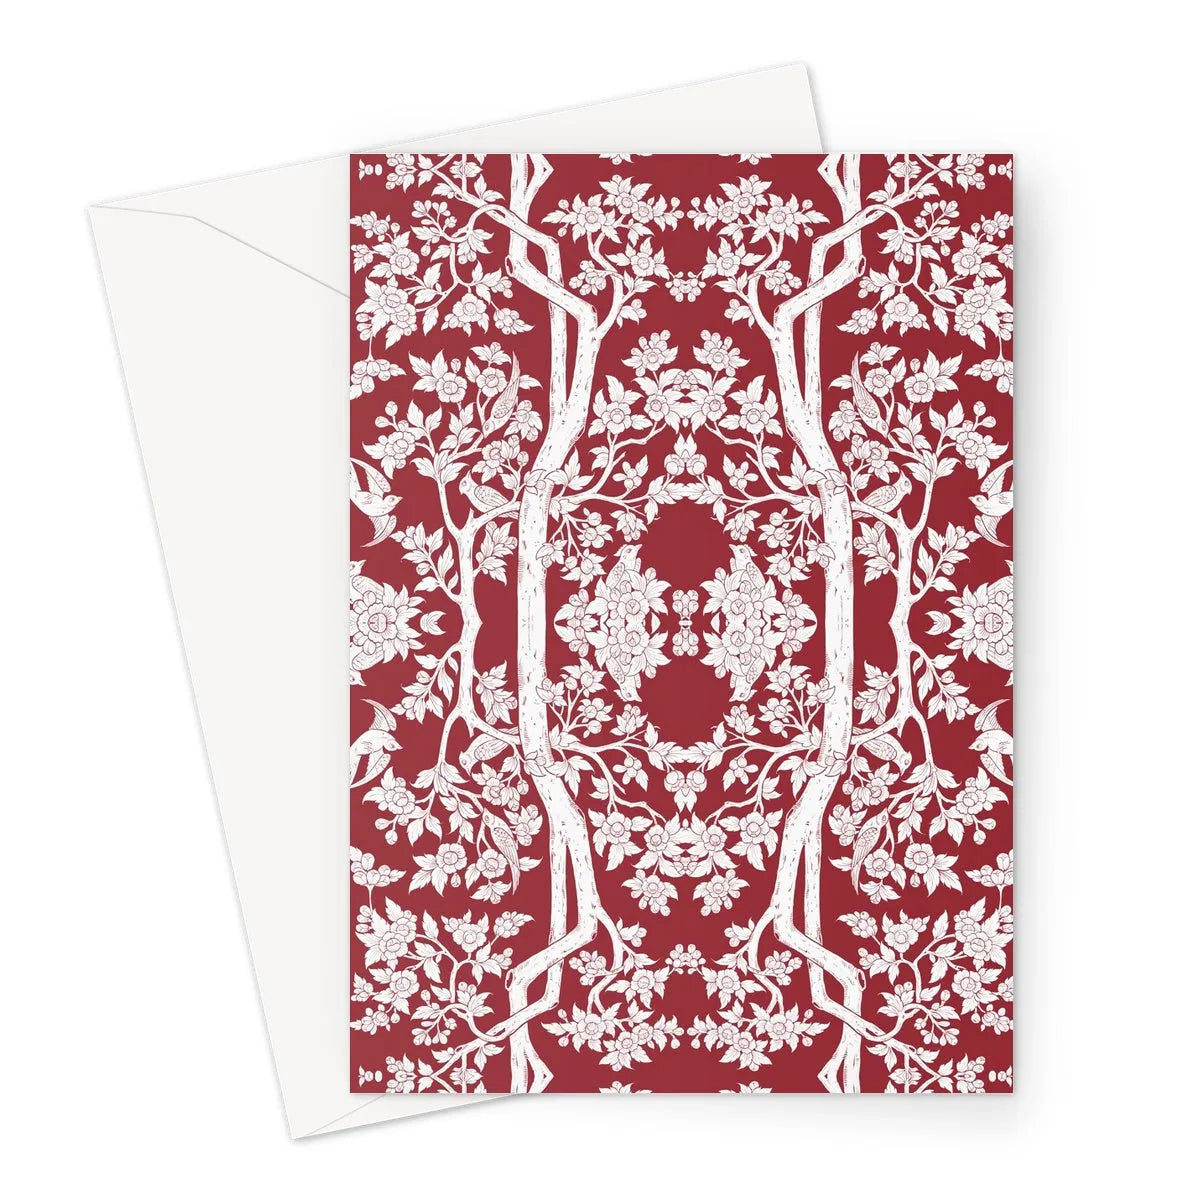 Aviary Red Greeting Card - A5 Portrait / 1 Card - Greeting & Note Cards - Aesthetic Art